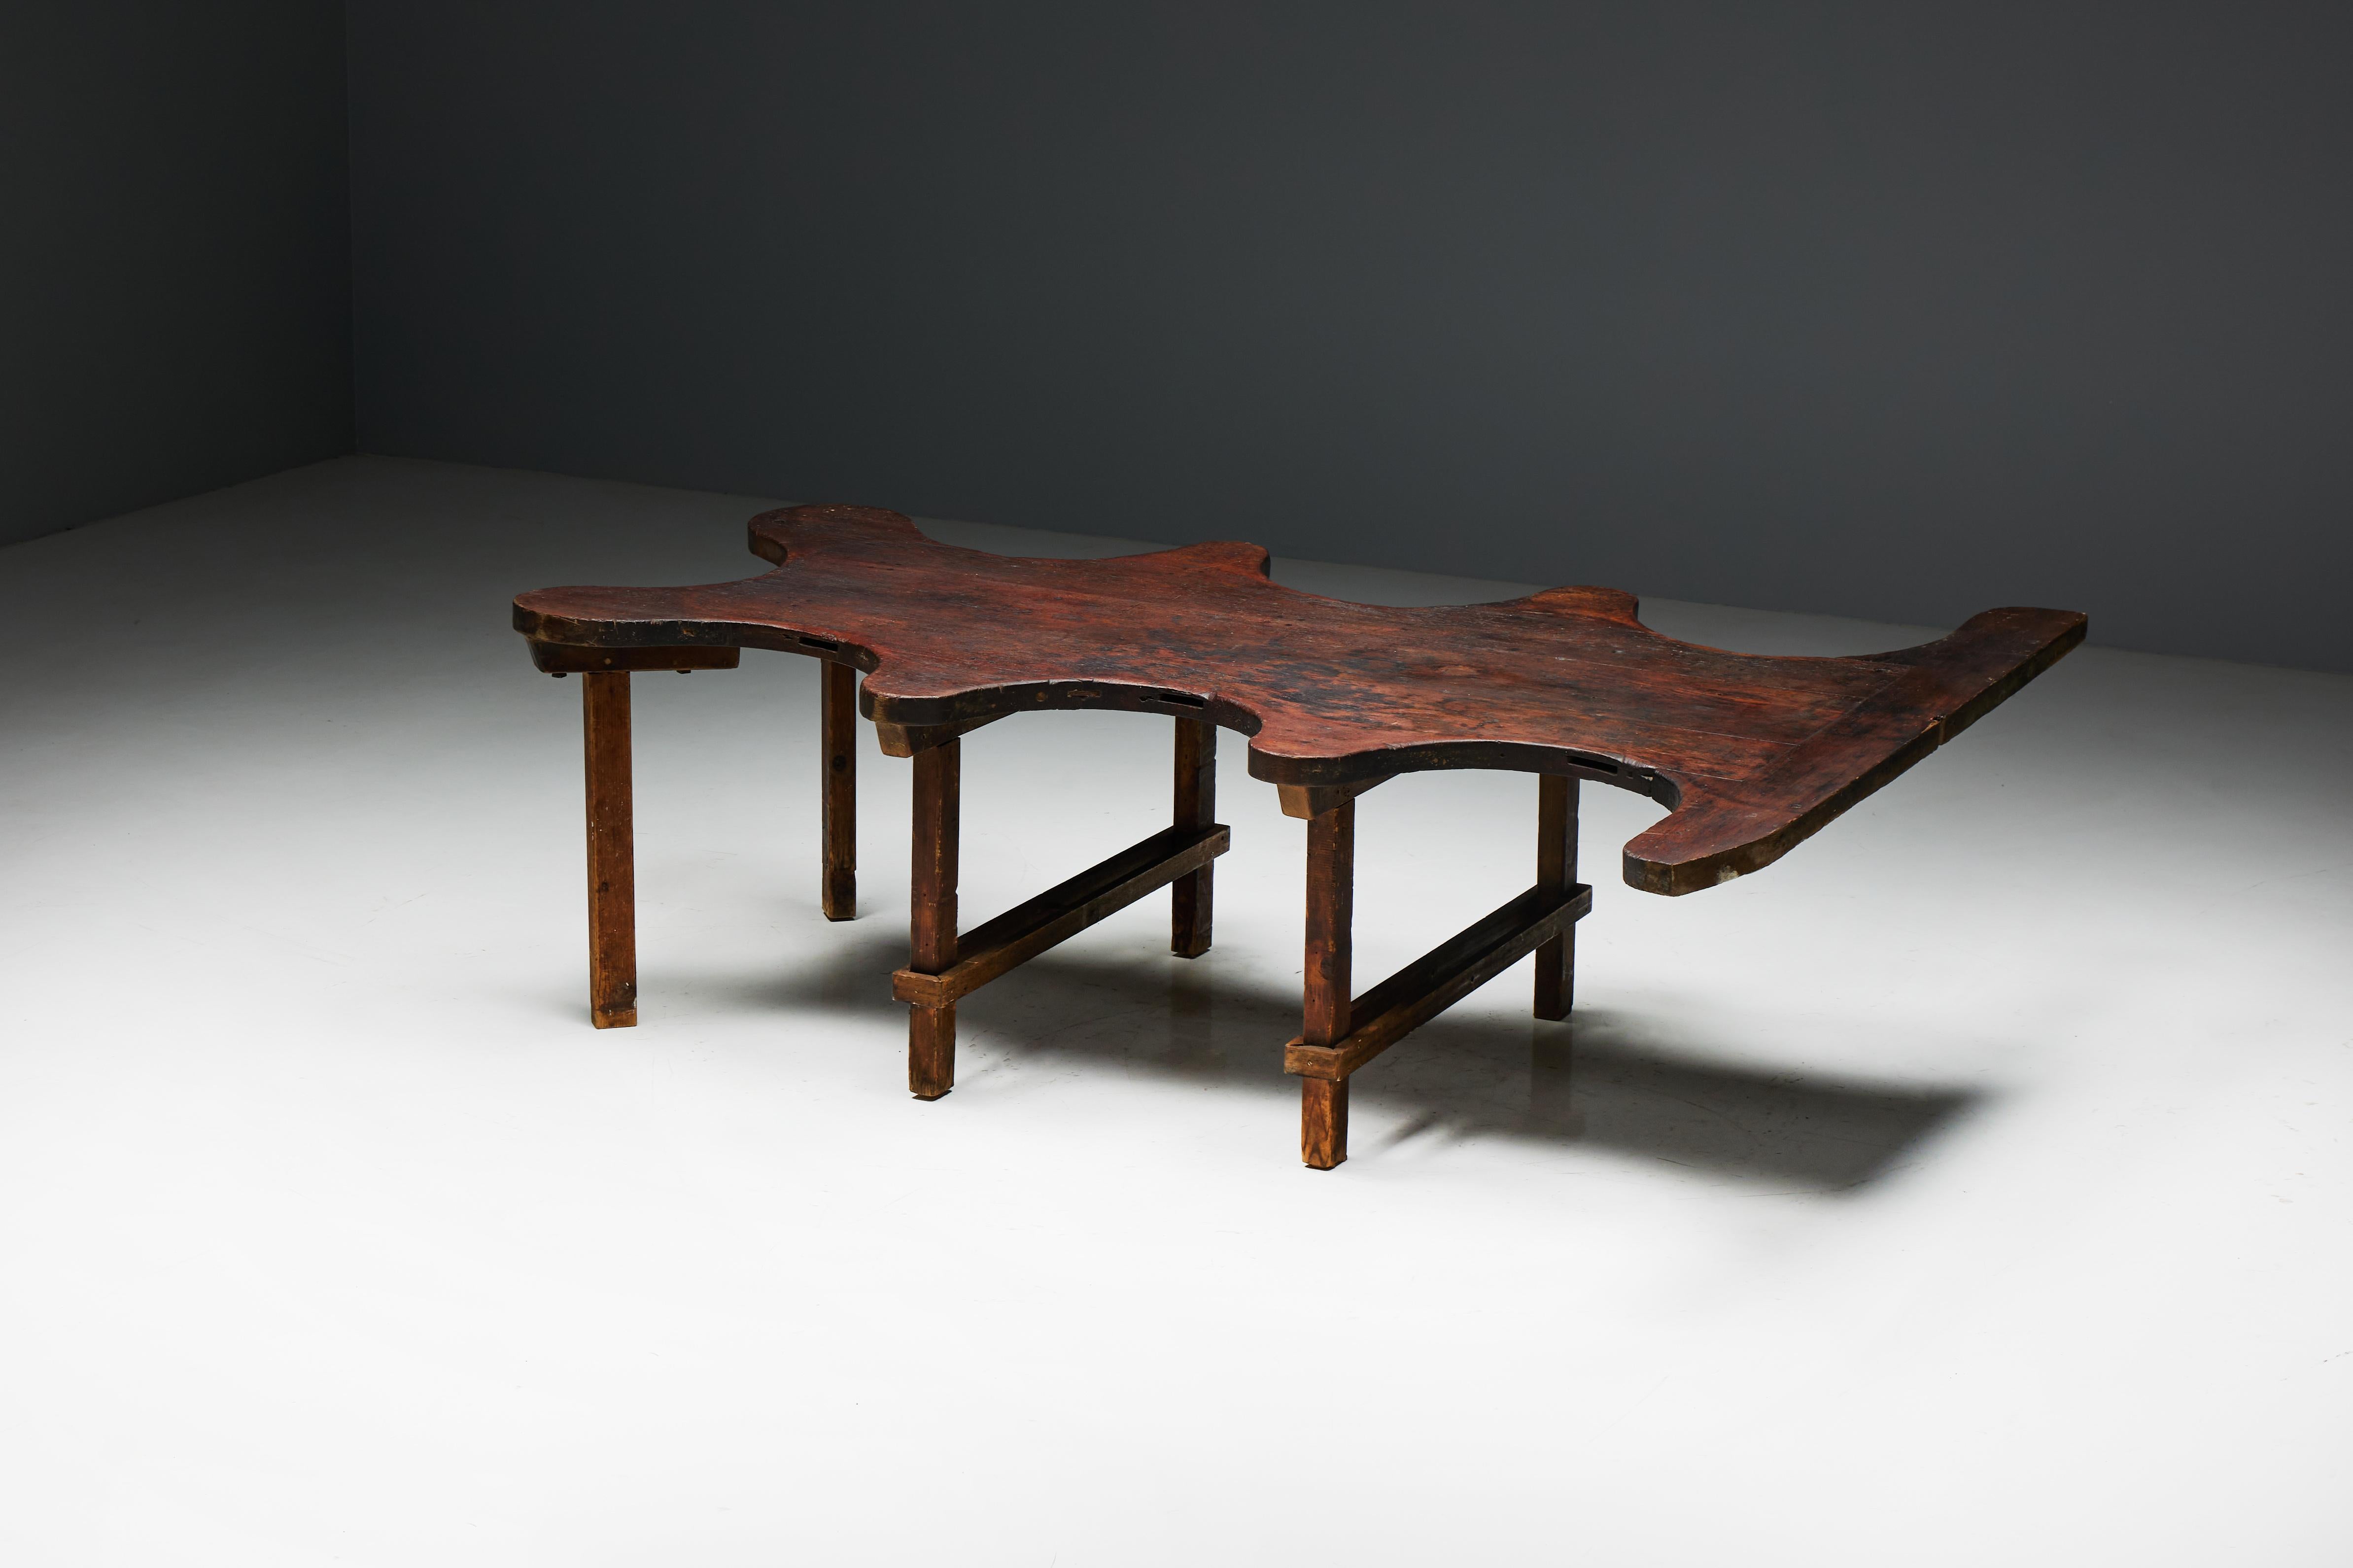 Rustic Free Form Organic Table, France, Late 19th Century In Excellent Condition For Sale In Antwerp, BE